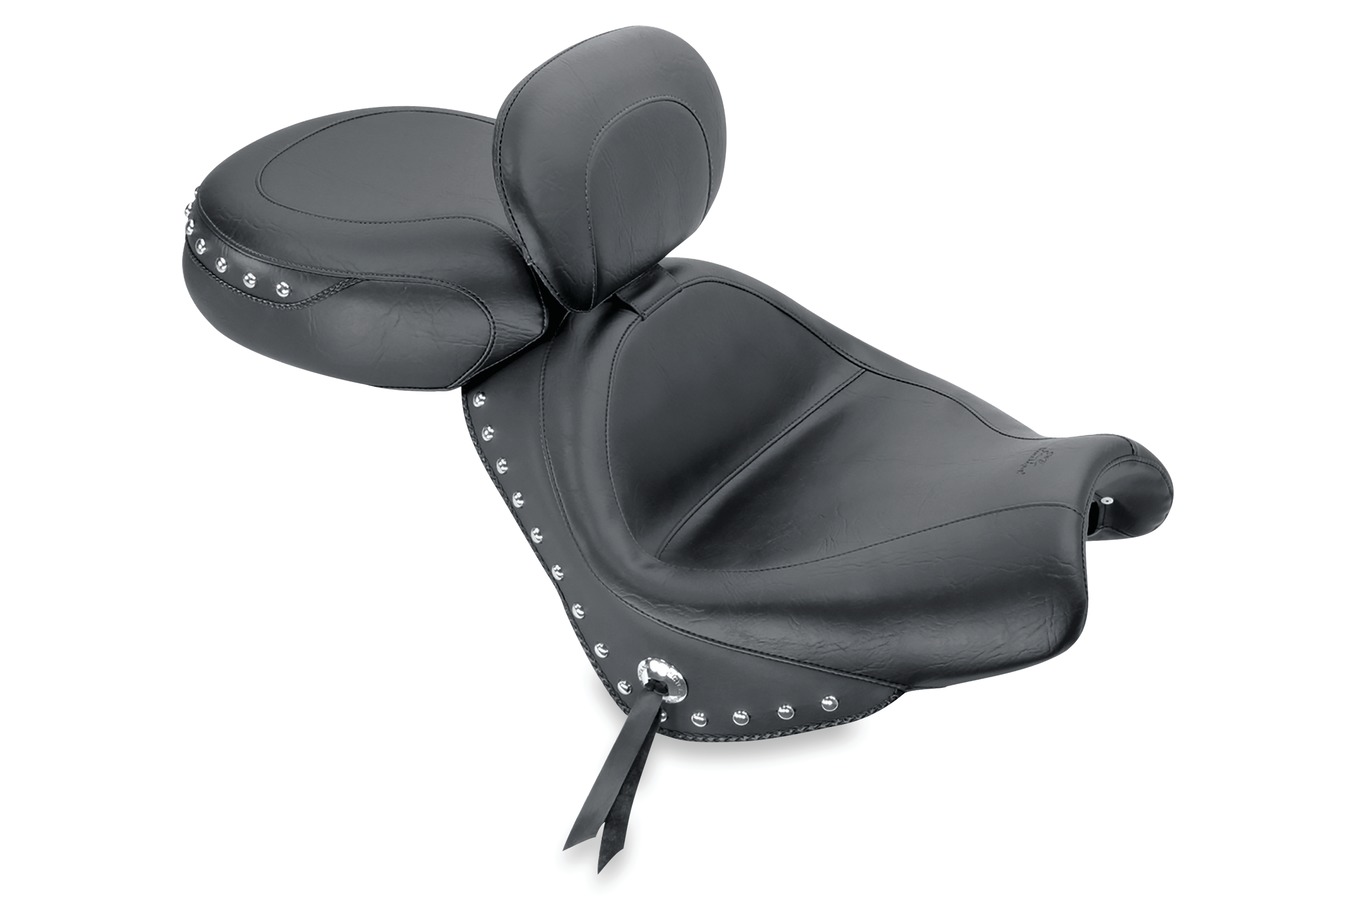 Wide Touring Two-Piece Seat with Driver Backrest for Honda VTX1300C 2004-